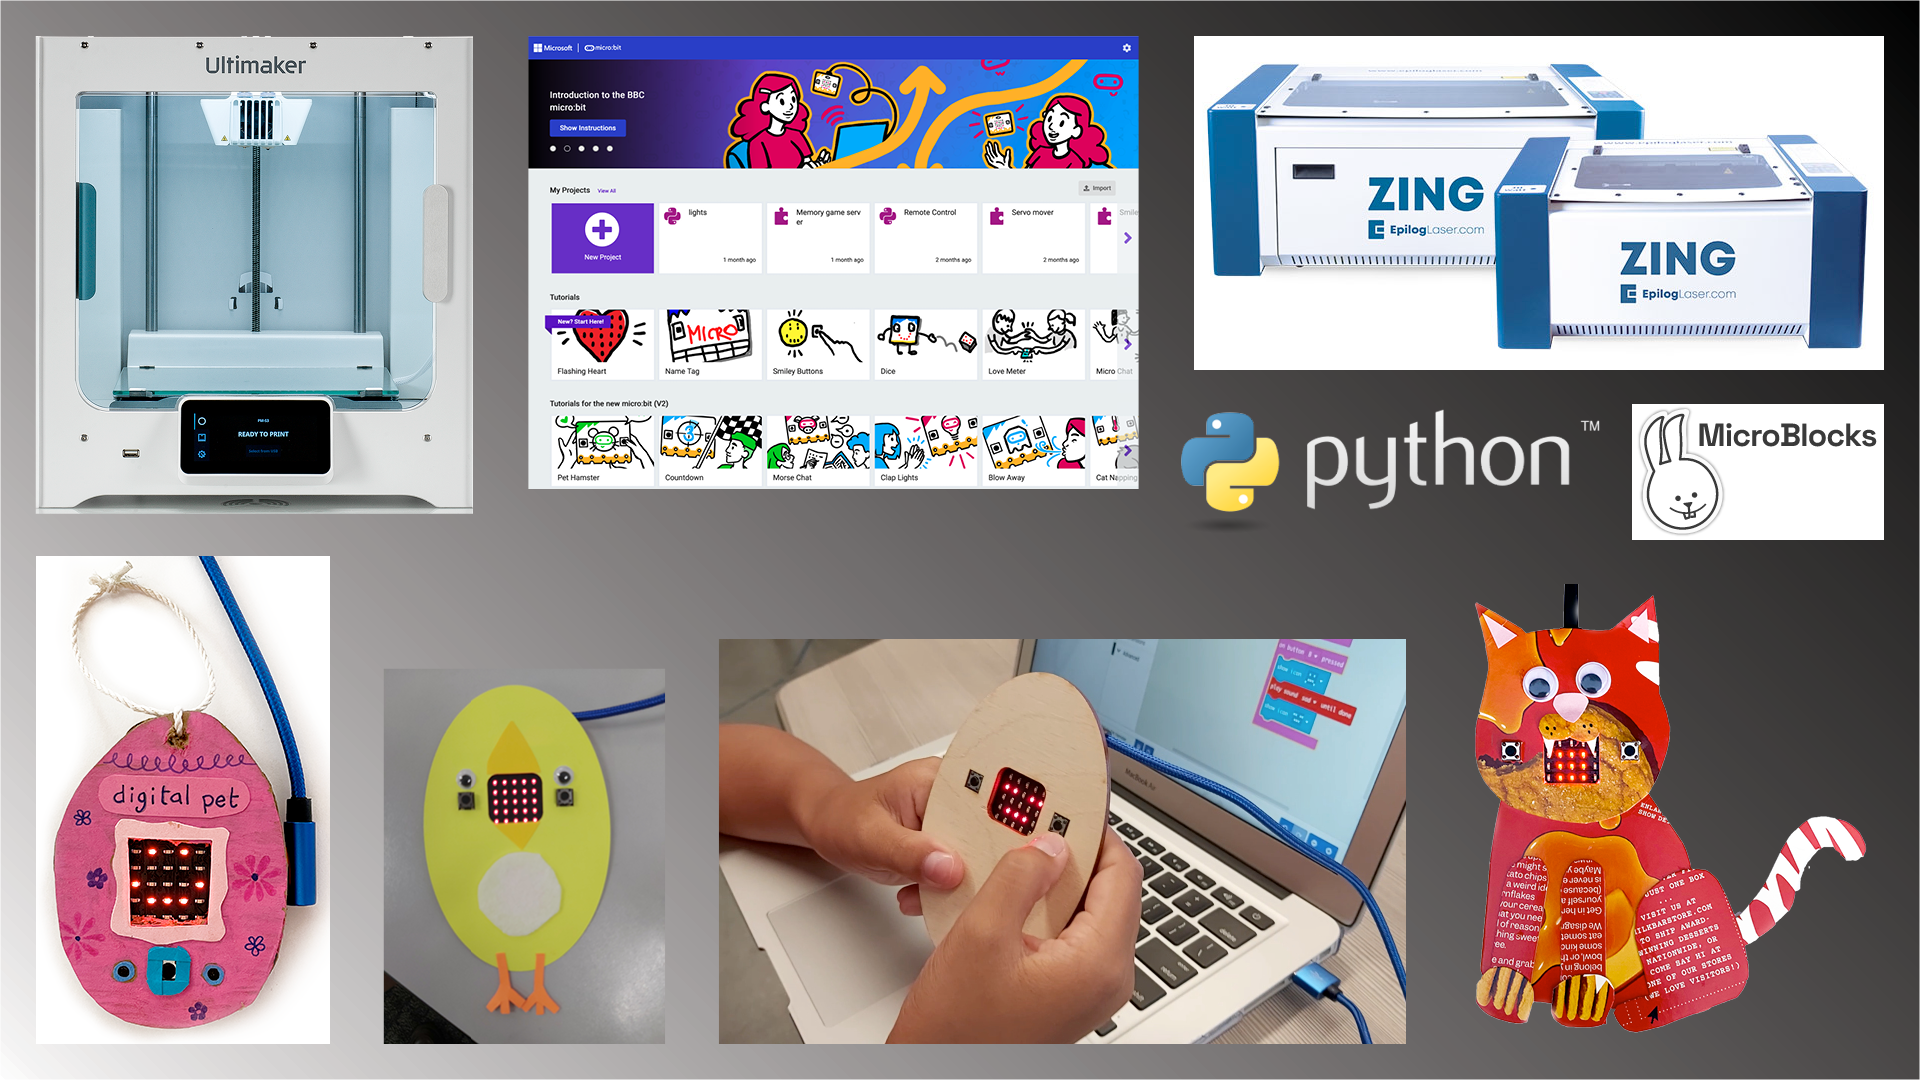 Title graphic showing micro:bit, sample pets, laser machines and a 3D printer